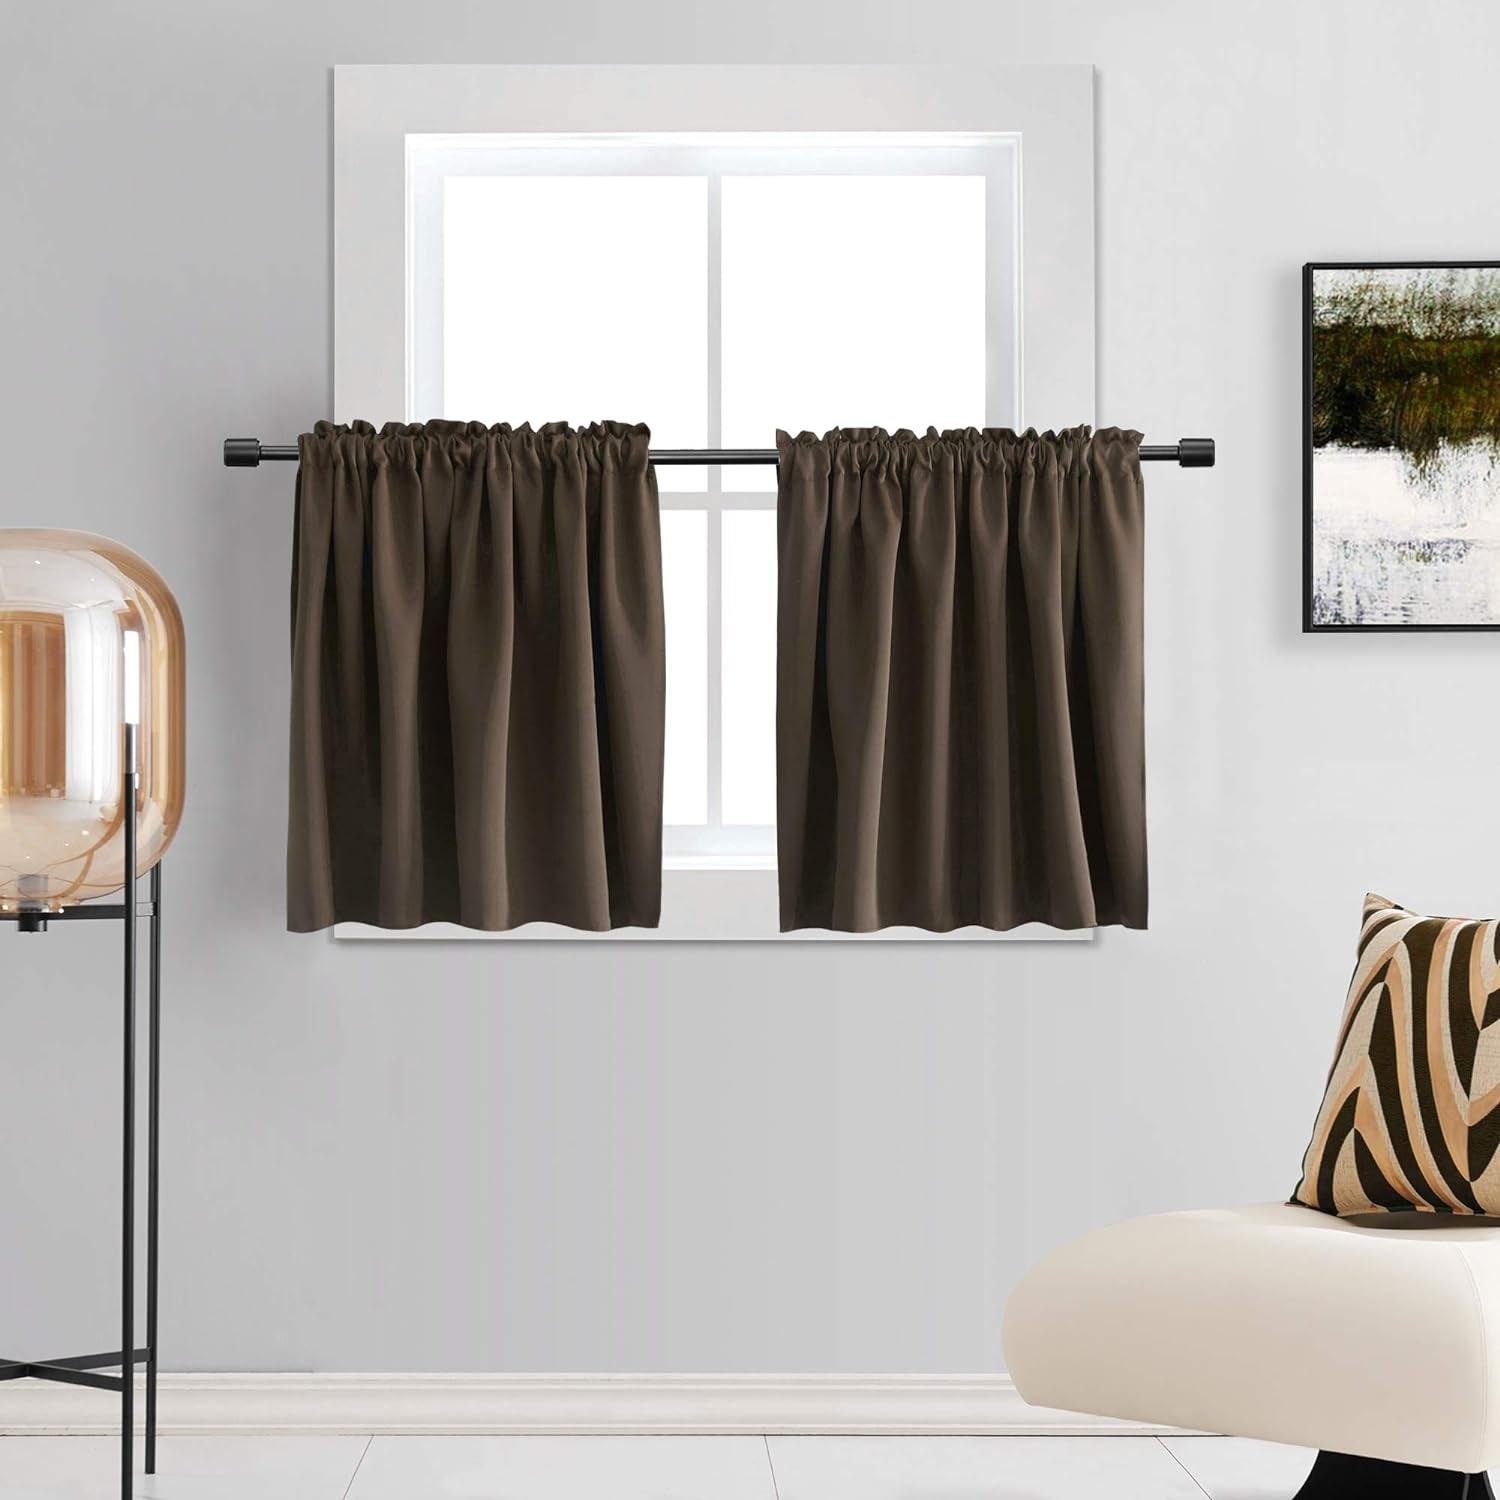 DONREN 24 Inch Length Curtains- 2 Panels Blackout Thermal Insulating Small Curtain Tiers for Bathroom with Rod Pocket (Black,42 Inch Width)  DONREN Coffee 42" X 30" 